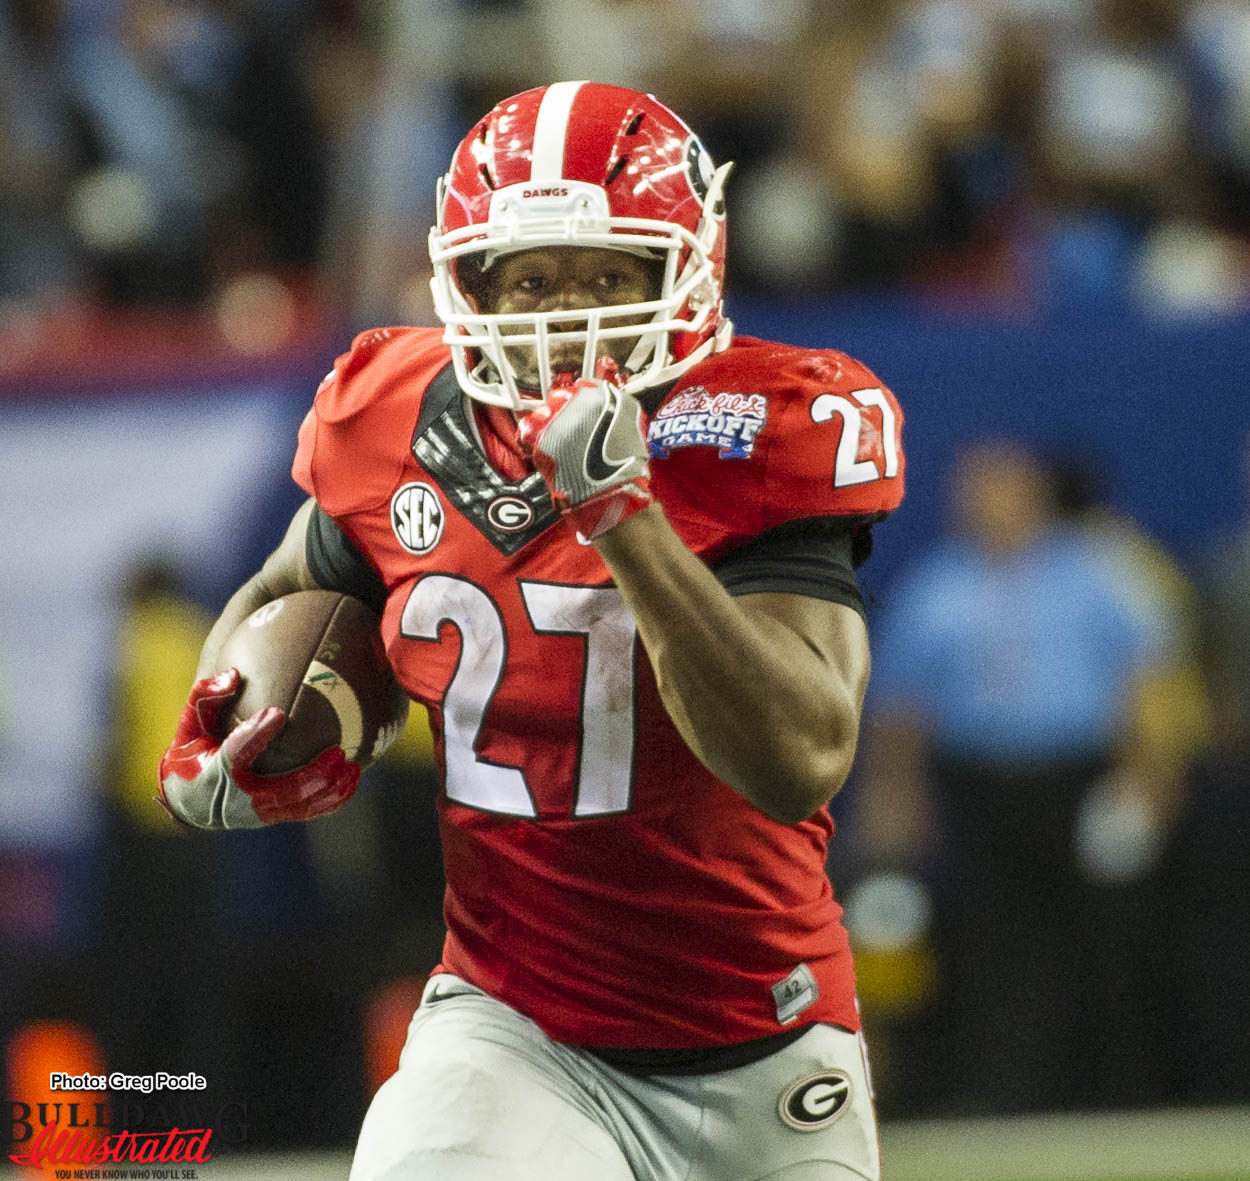 Nick Chubb on his way to the end zone